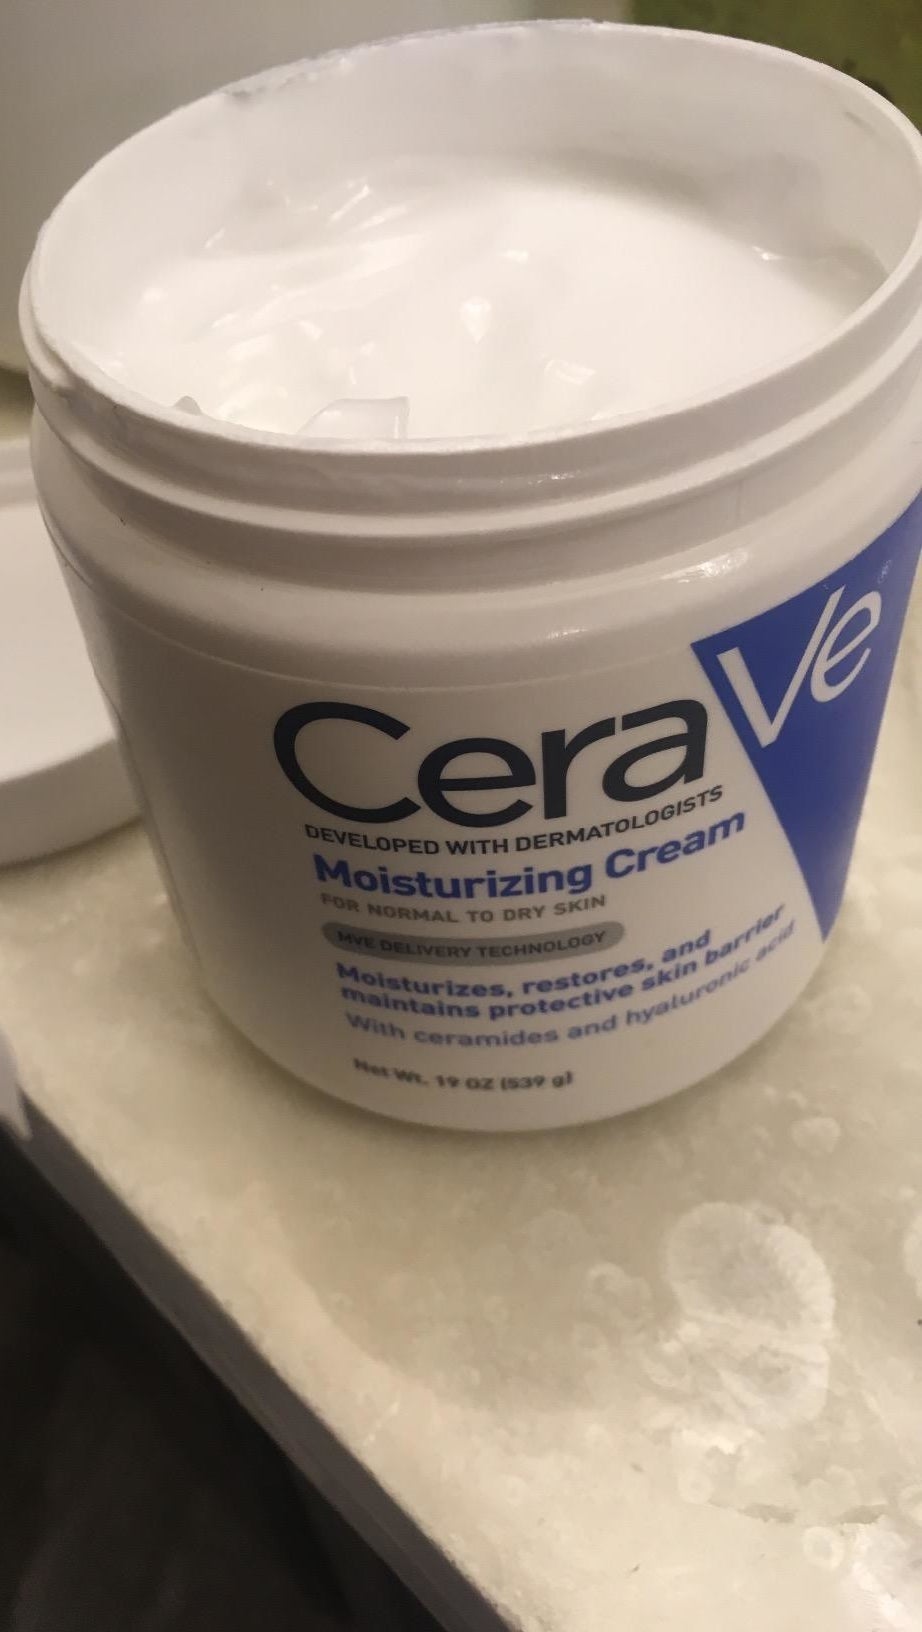 A tub of the moisturizer, which you scoop out with your finger